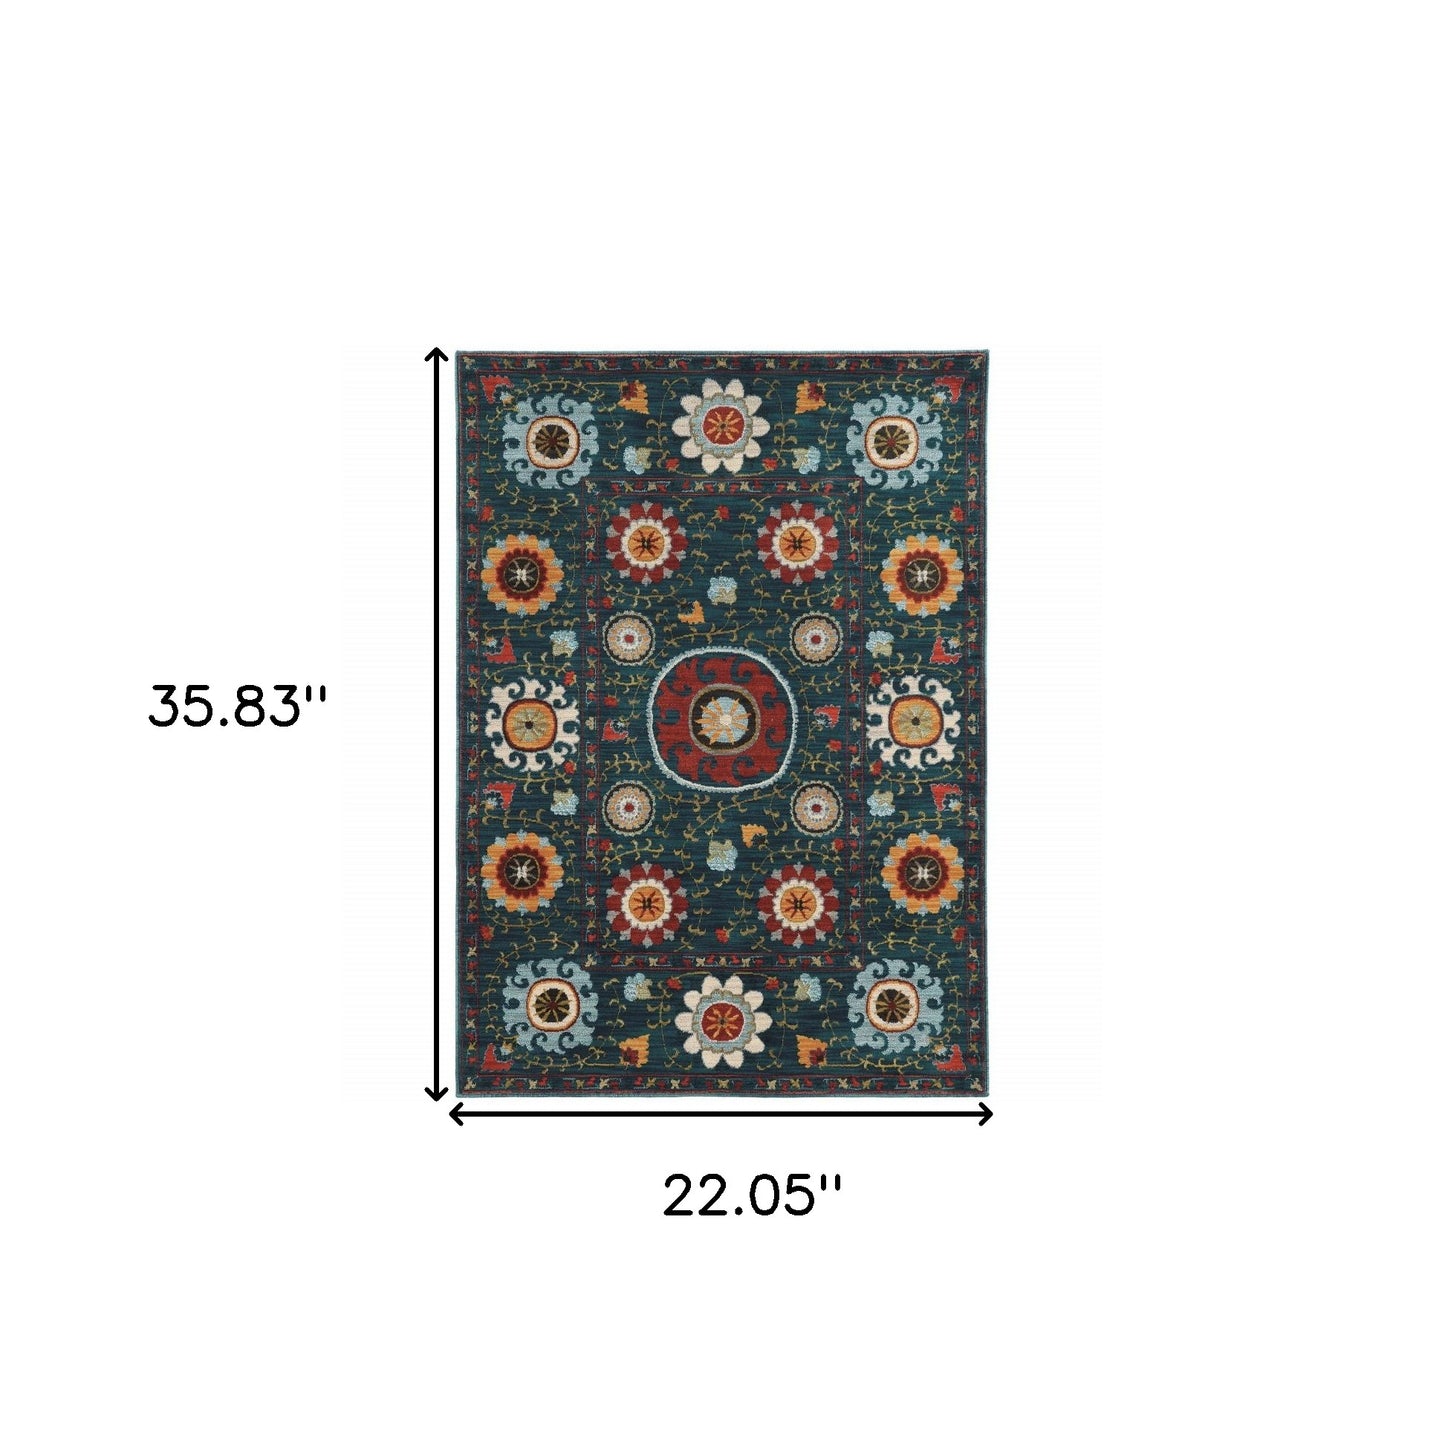 2' X 3' Teal Blue Rust Gold And Ivory Floral Power Loom Stain Resistant Area Rug